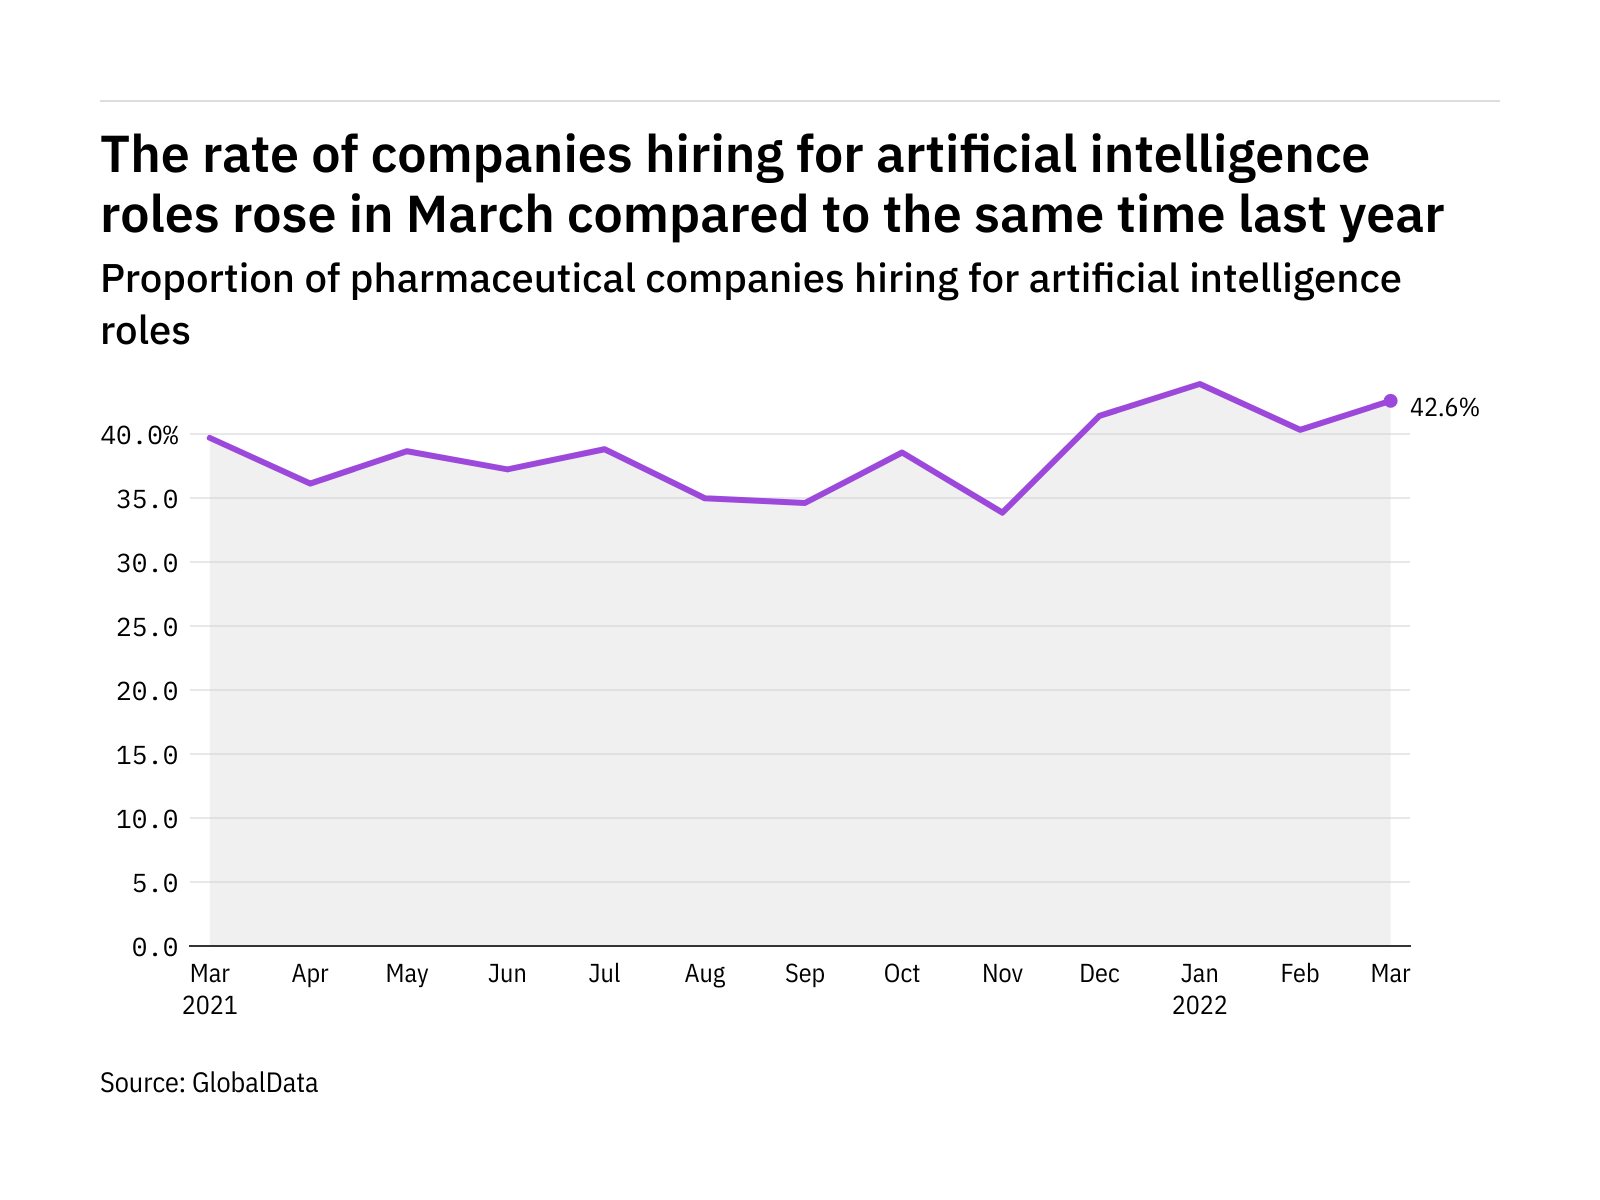 Artificial intelligence hiring levels in the pharmaceutical industry rose in March 2022